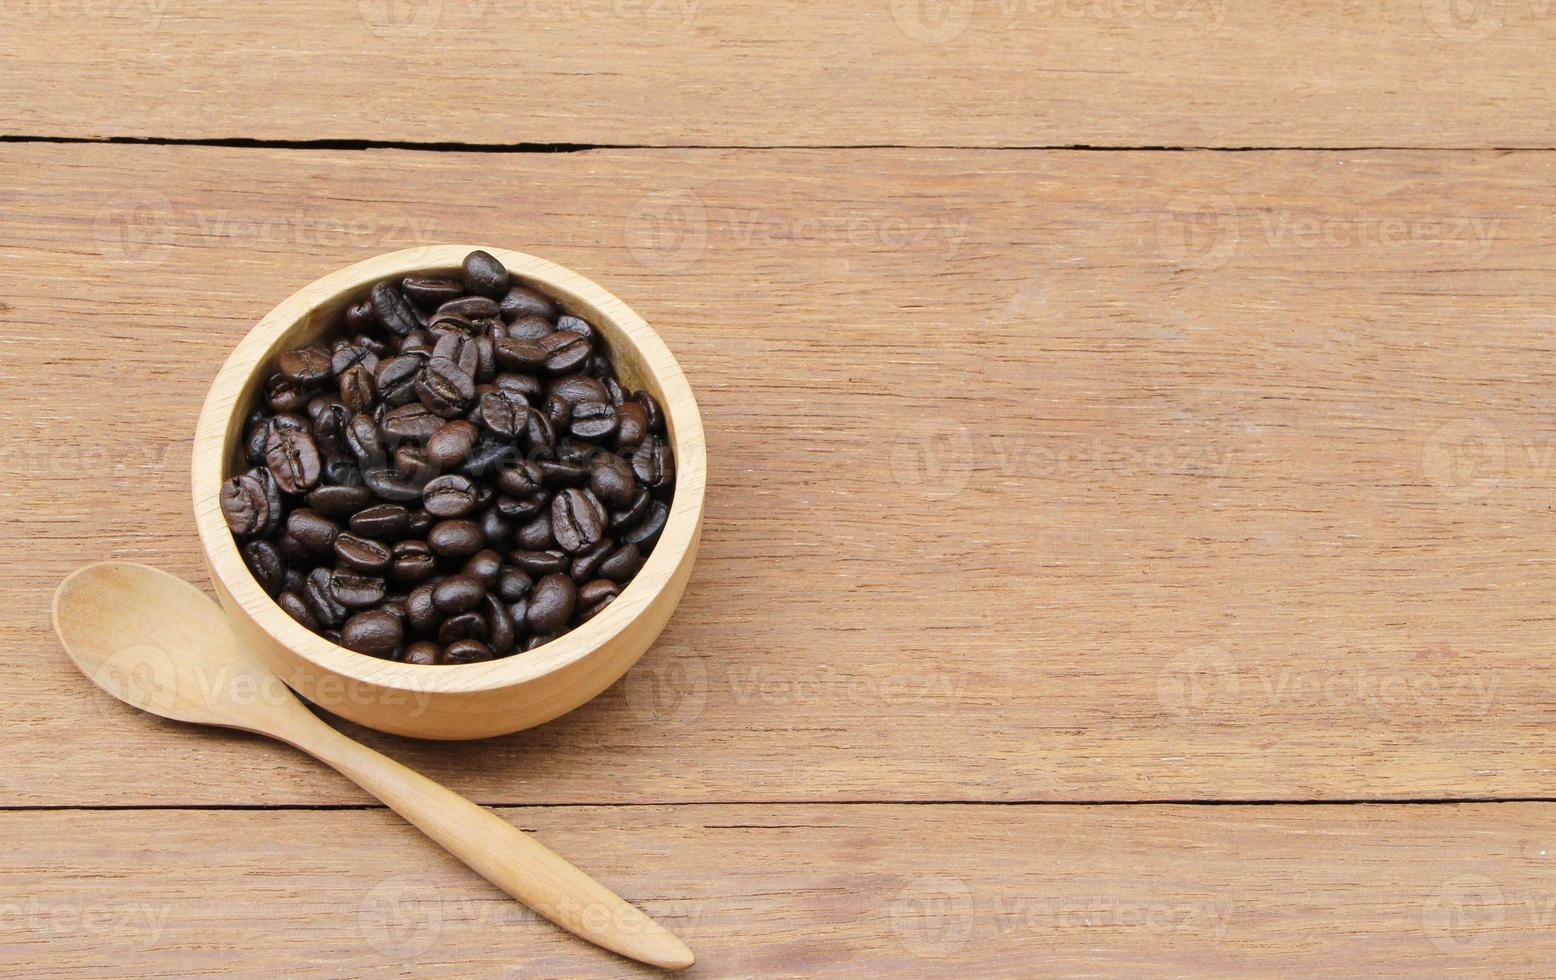 roasted coffee beans in a wooden bowl on a rustic wooden table with a spoon. Selective focus on coffee beans in a bowl photo